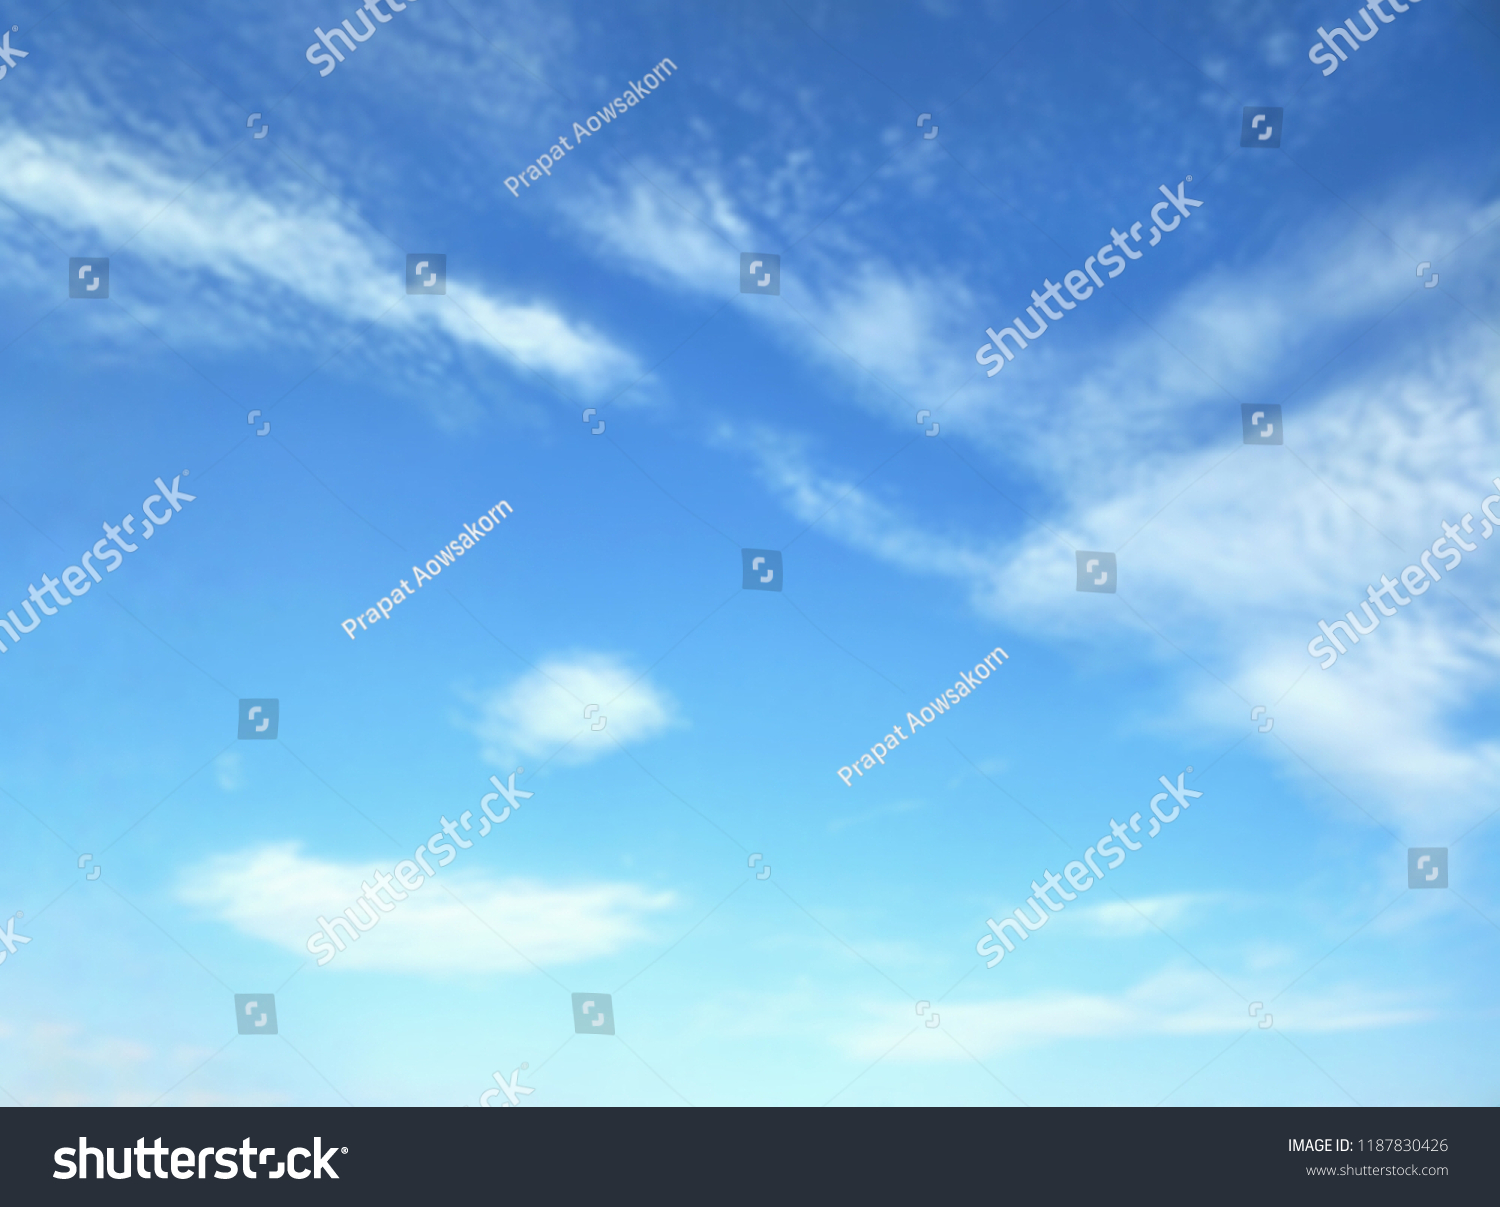 Blur image of clouds and blue sky for natural  background design in brightly and refreshing concept,low angle view with copy space  #1187830426